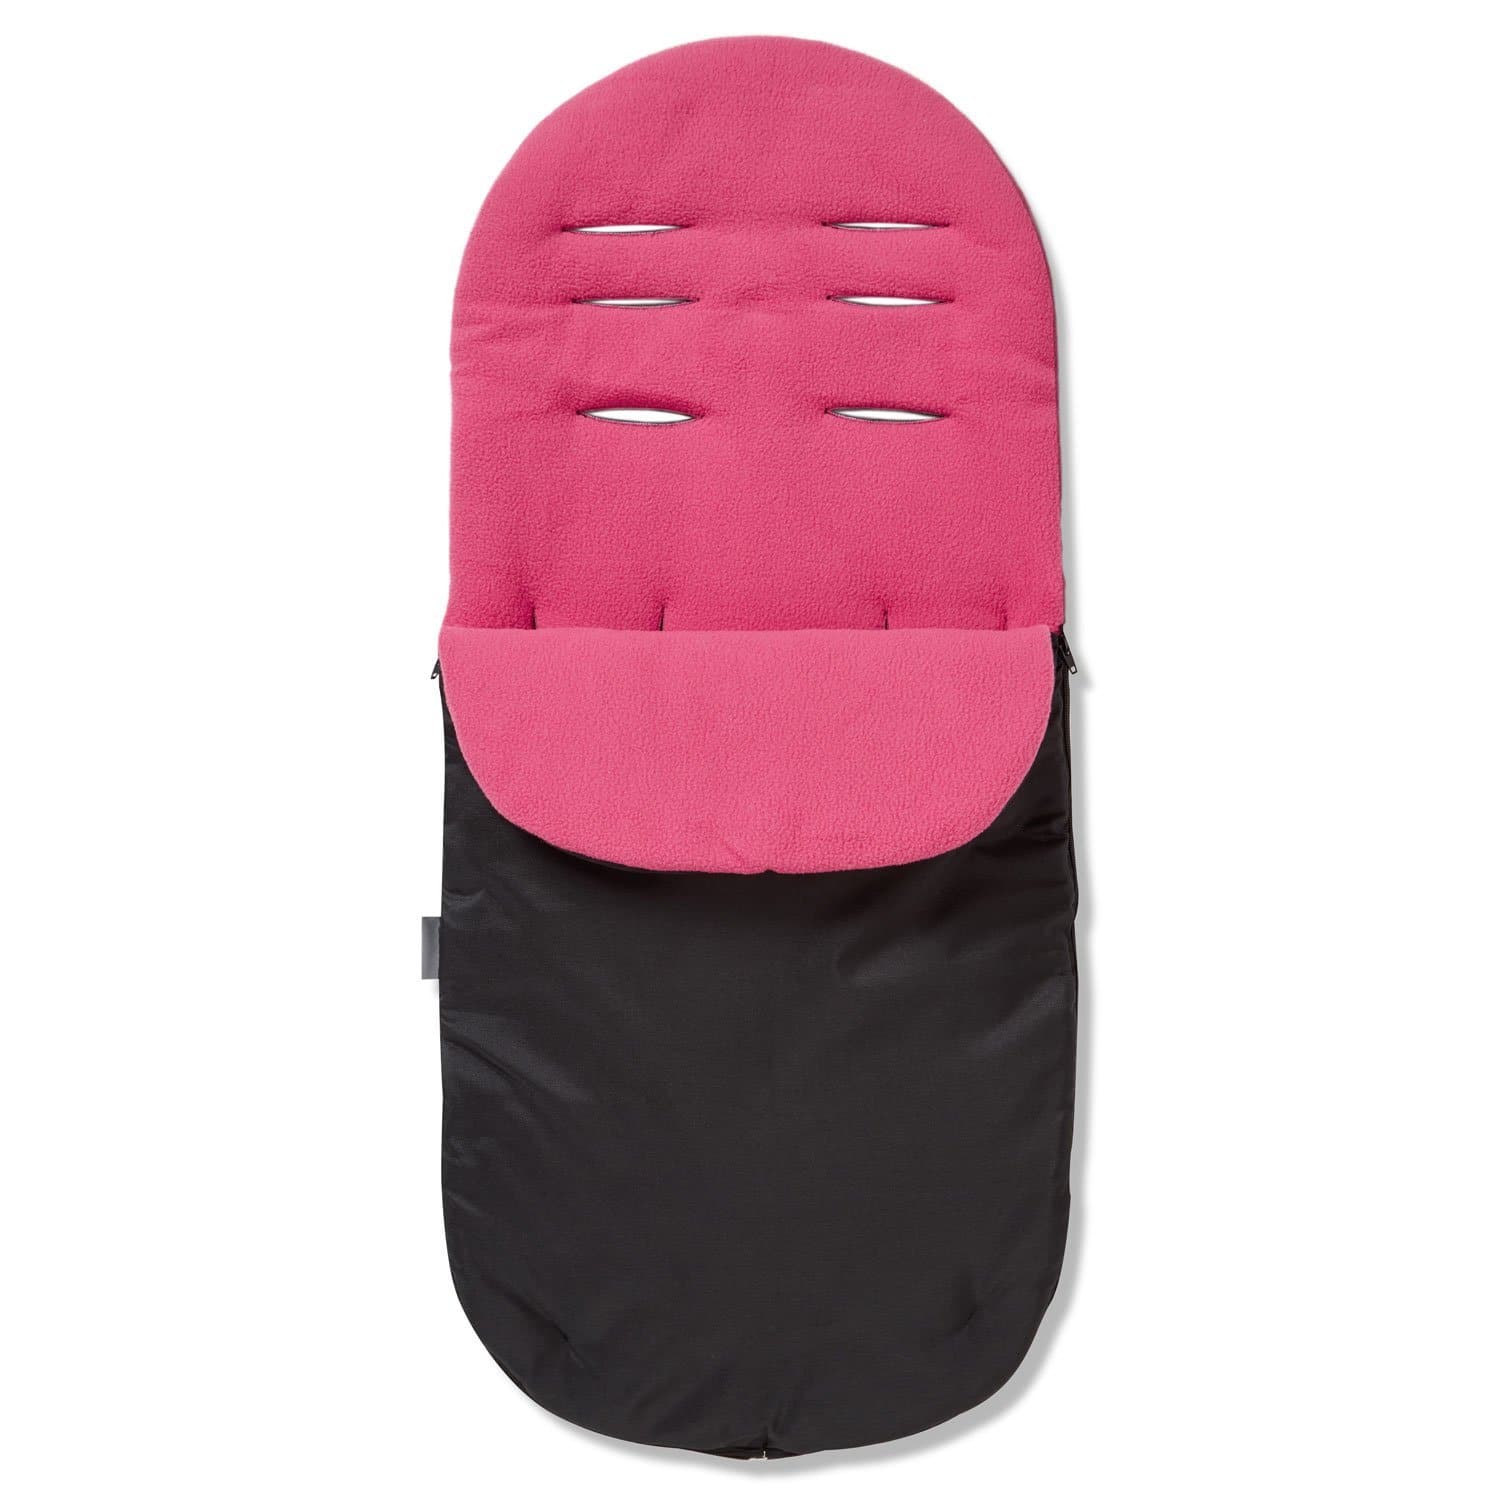 Footmuff / Cosy Toes Compatible with Tutti Bambini - Dark Pink / Fits All Models | For Your Little One